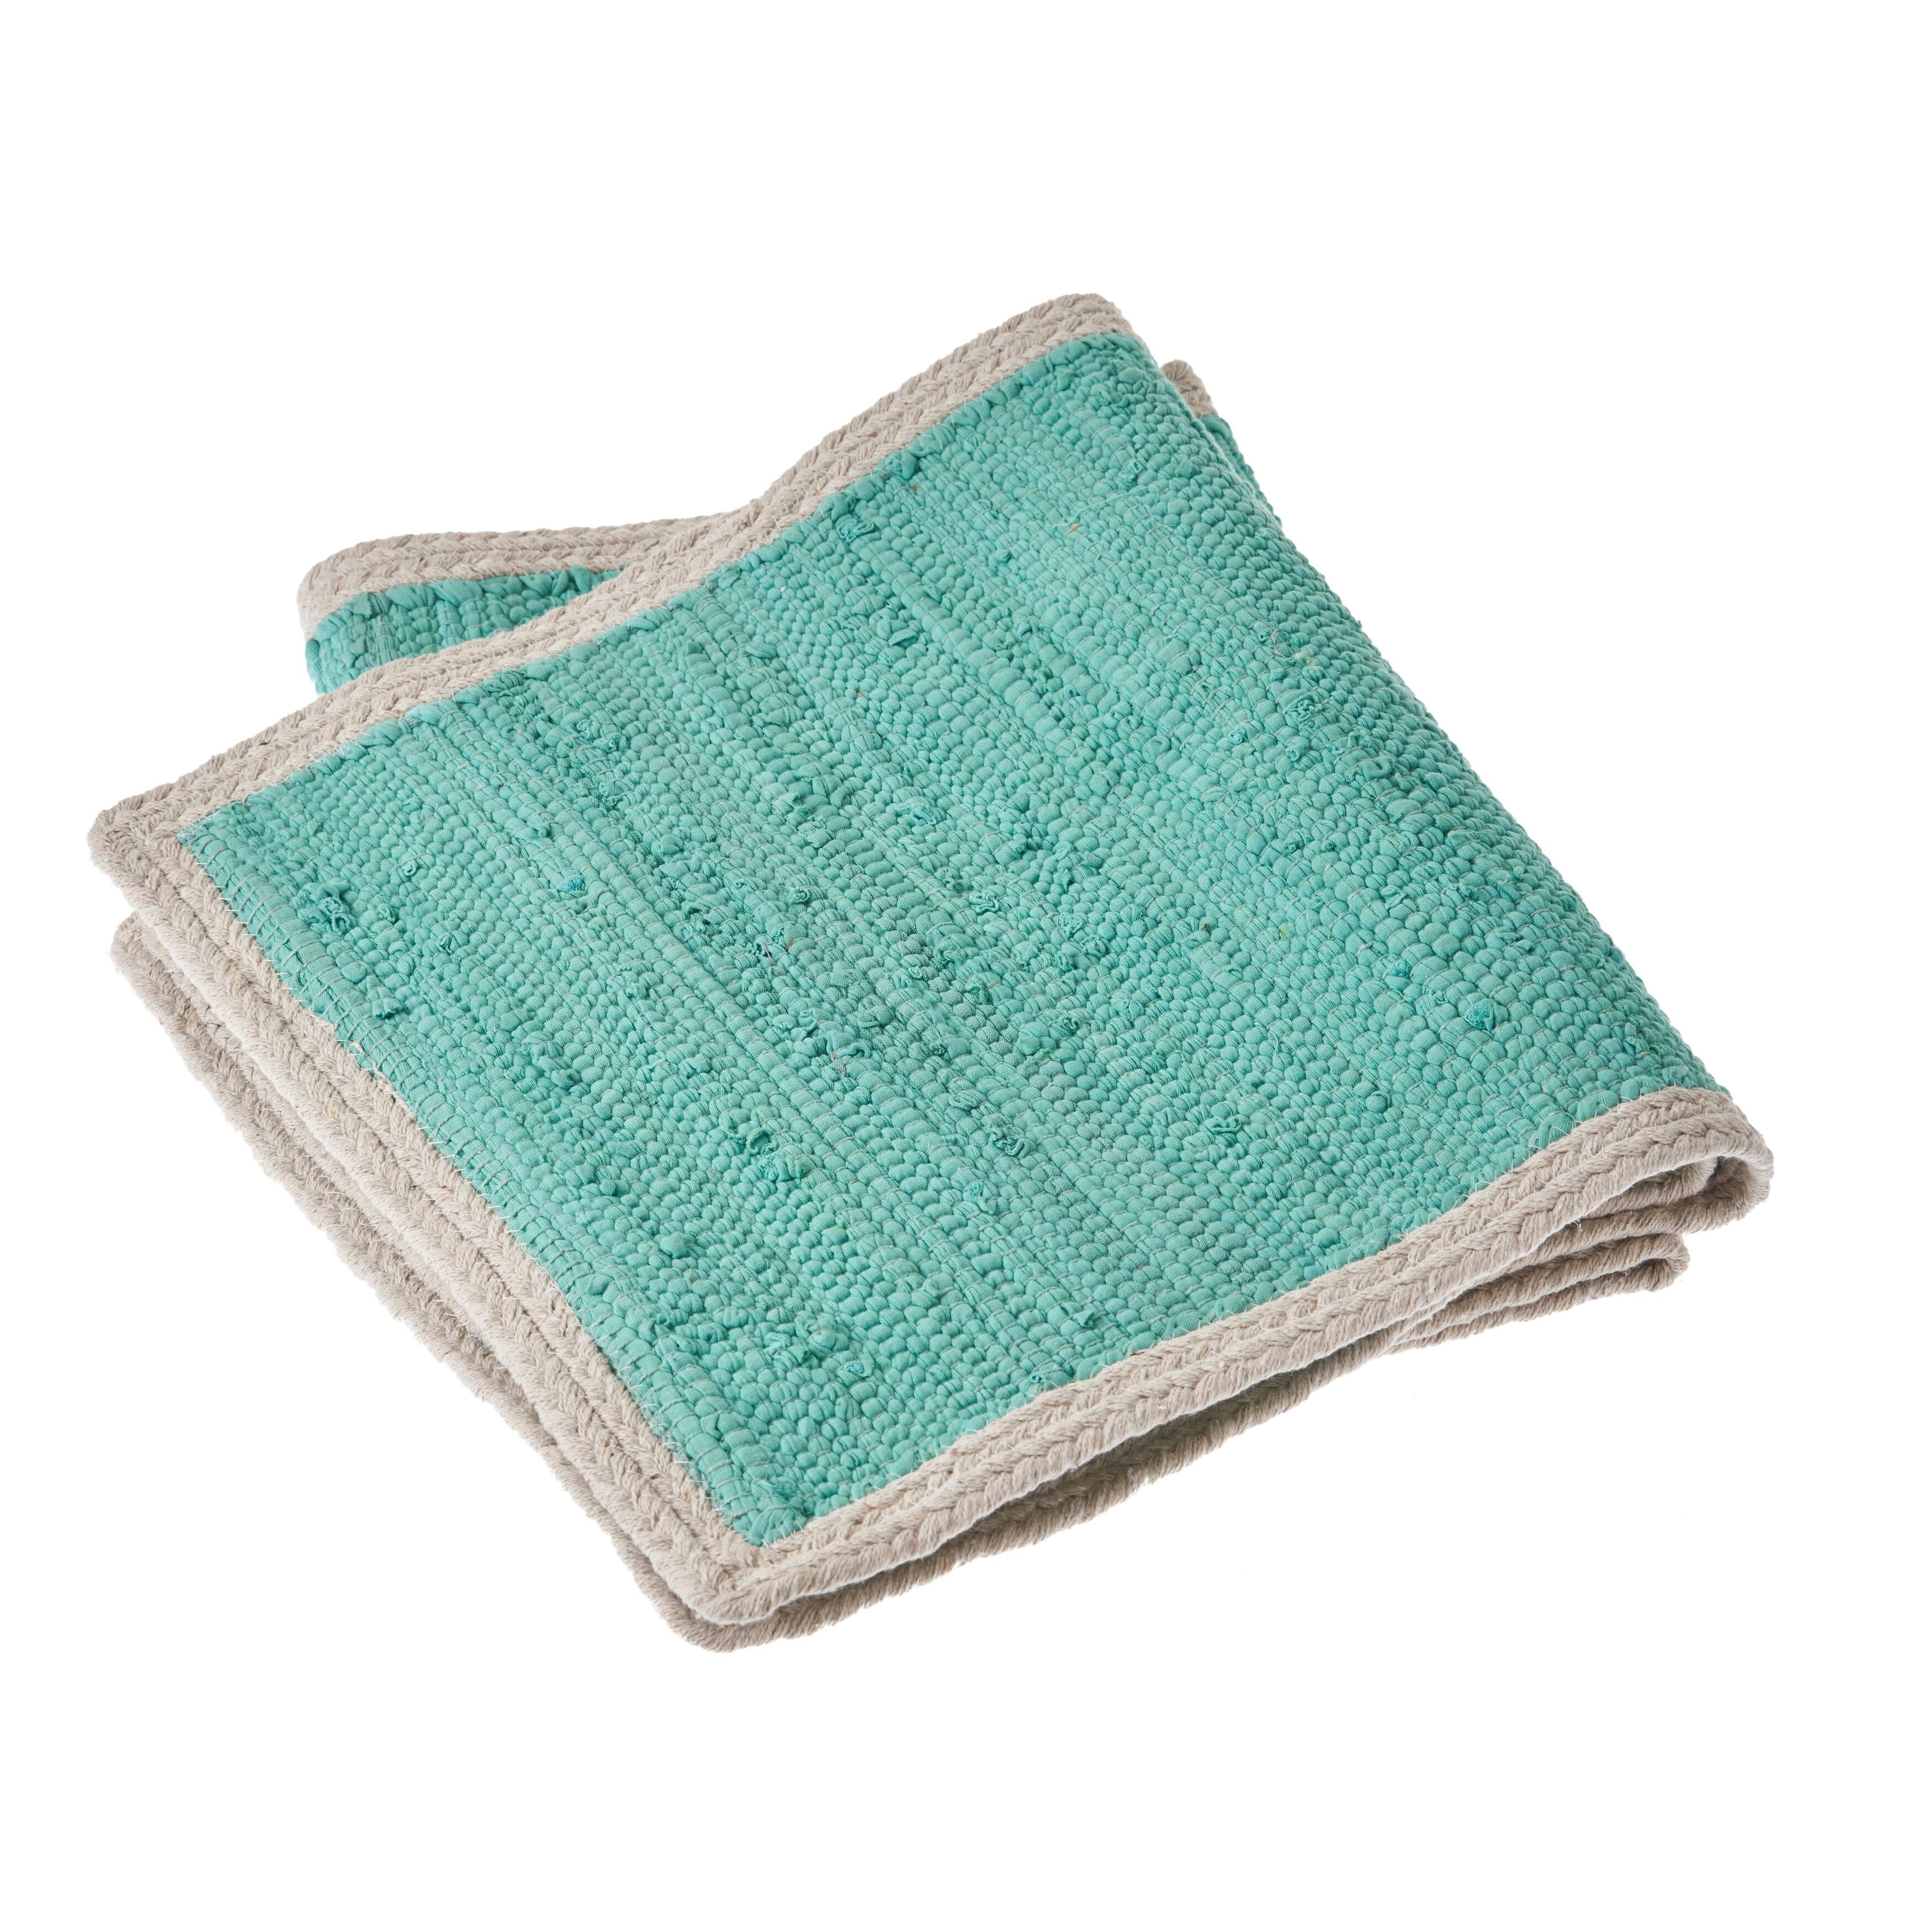 LR Home Bordered Turquoise Table Runner - 1'-4" X 6'-8"